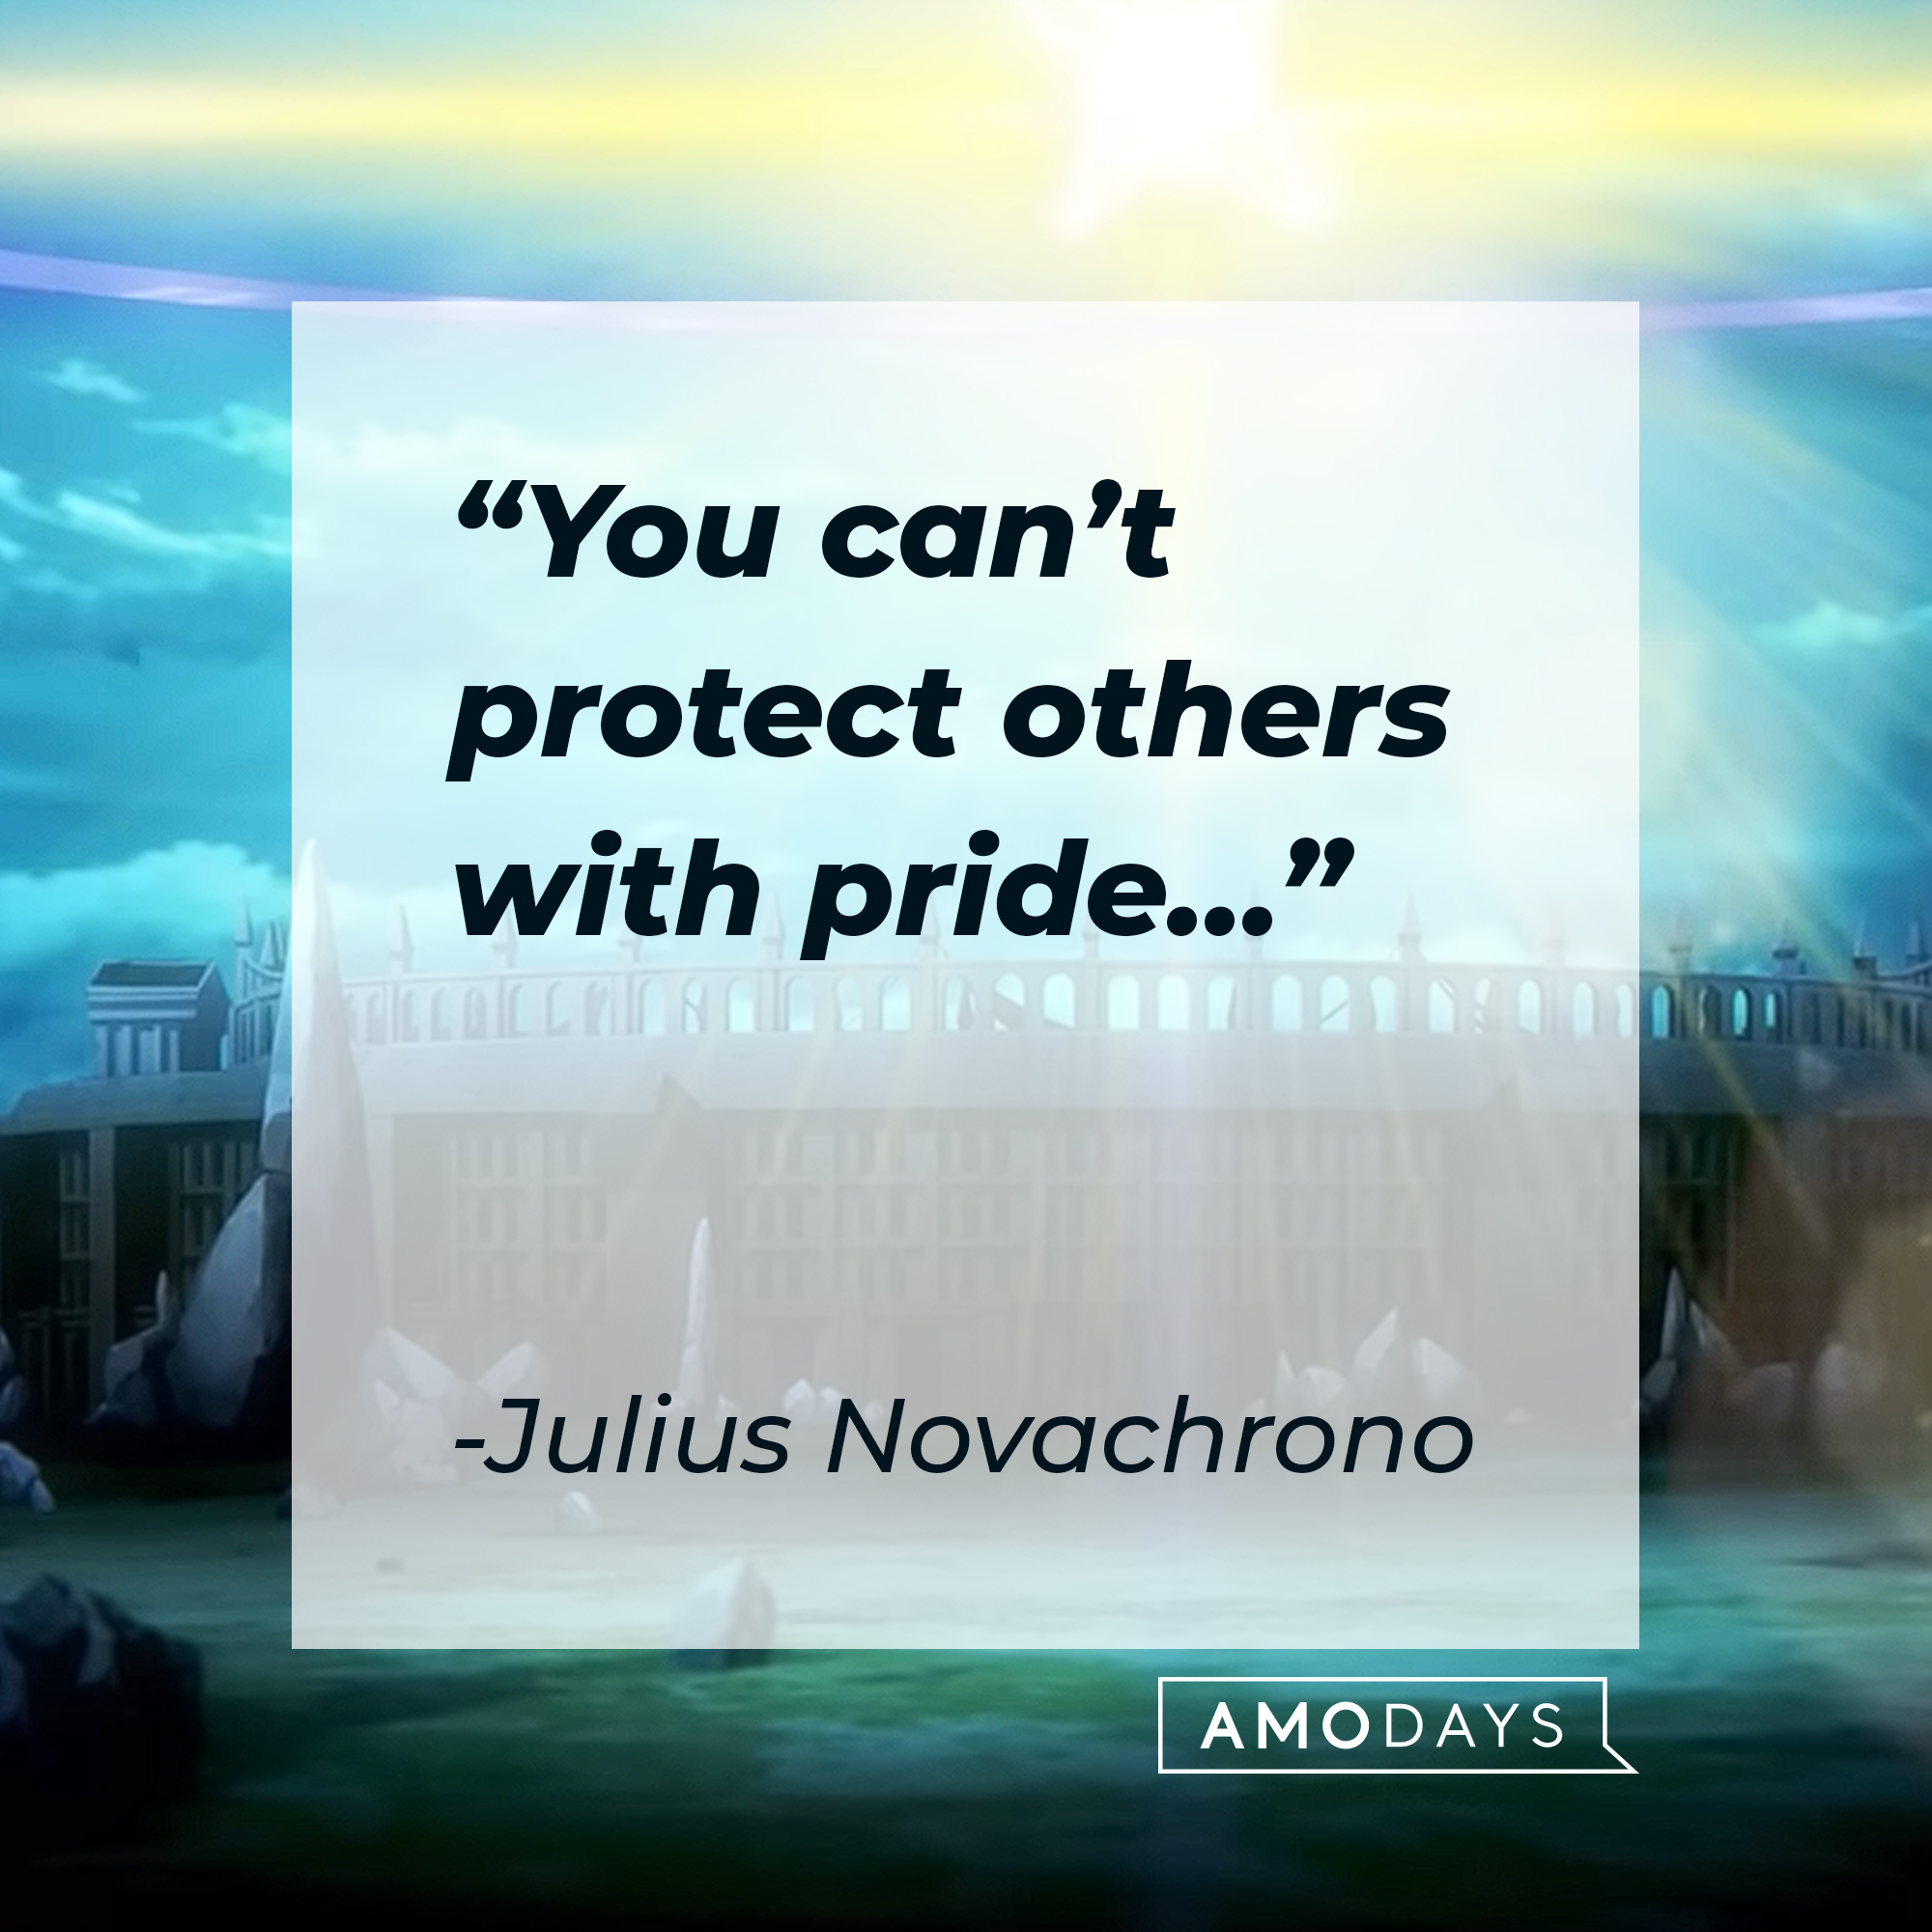 An image of the show "Black Clover" with his quote: “You can’t protect others with pride…” | Source: youtube/netflixanime